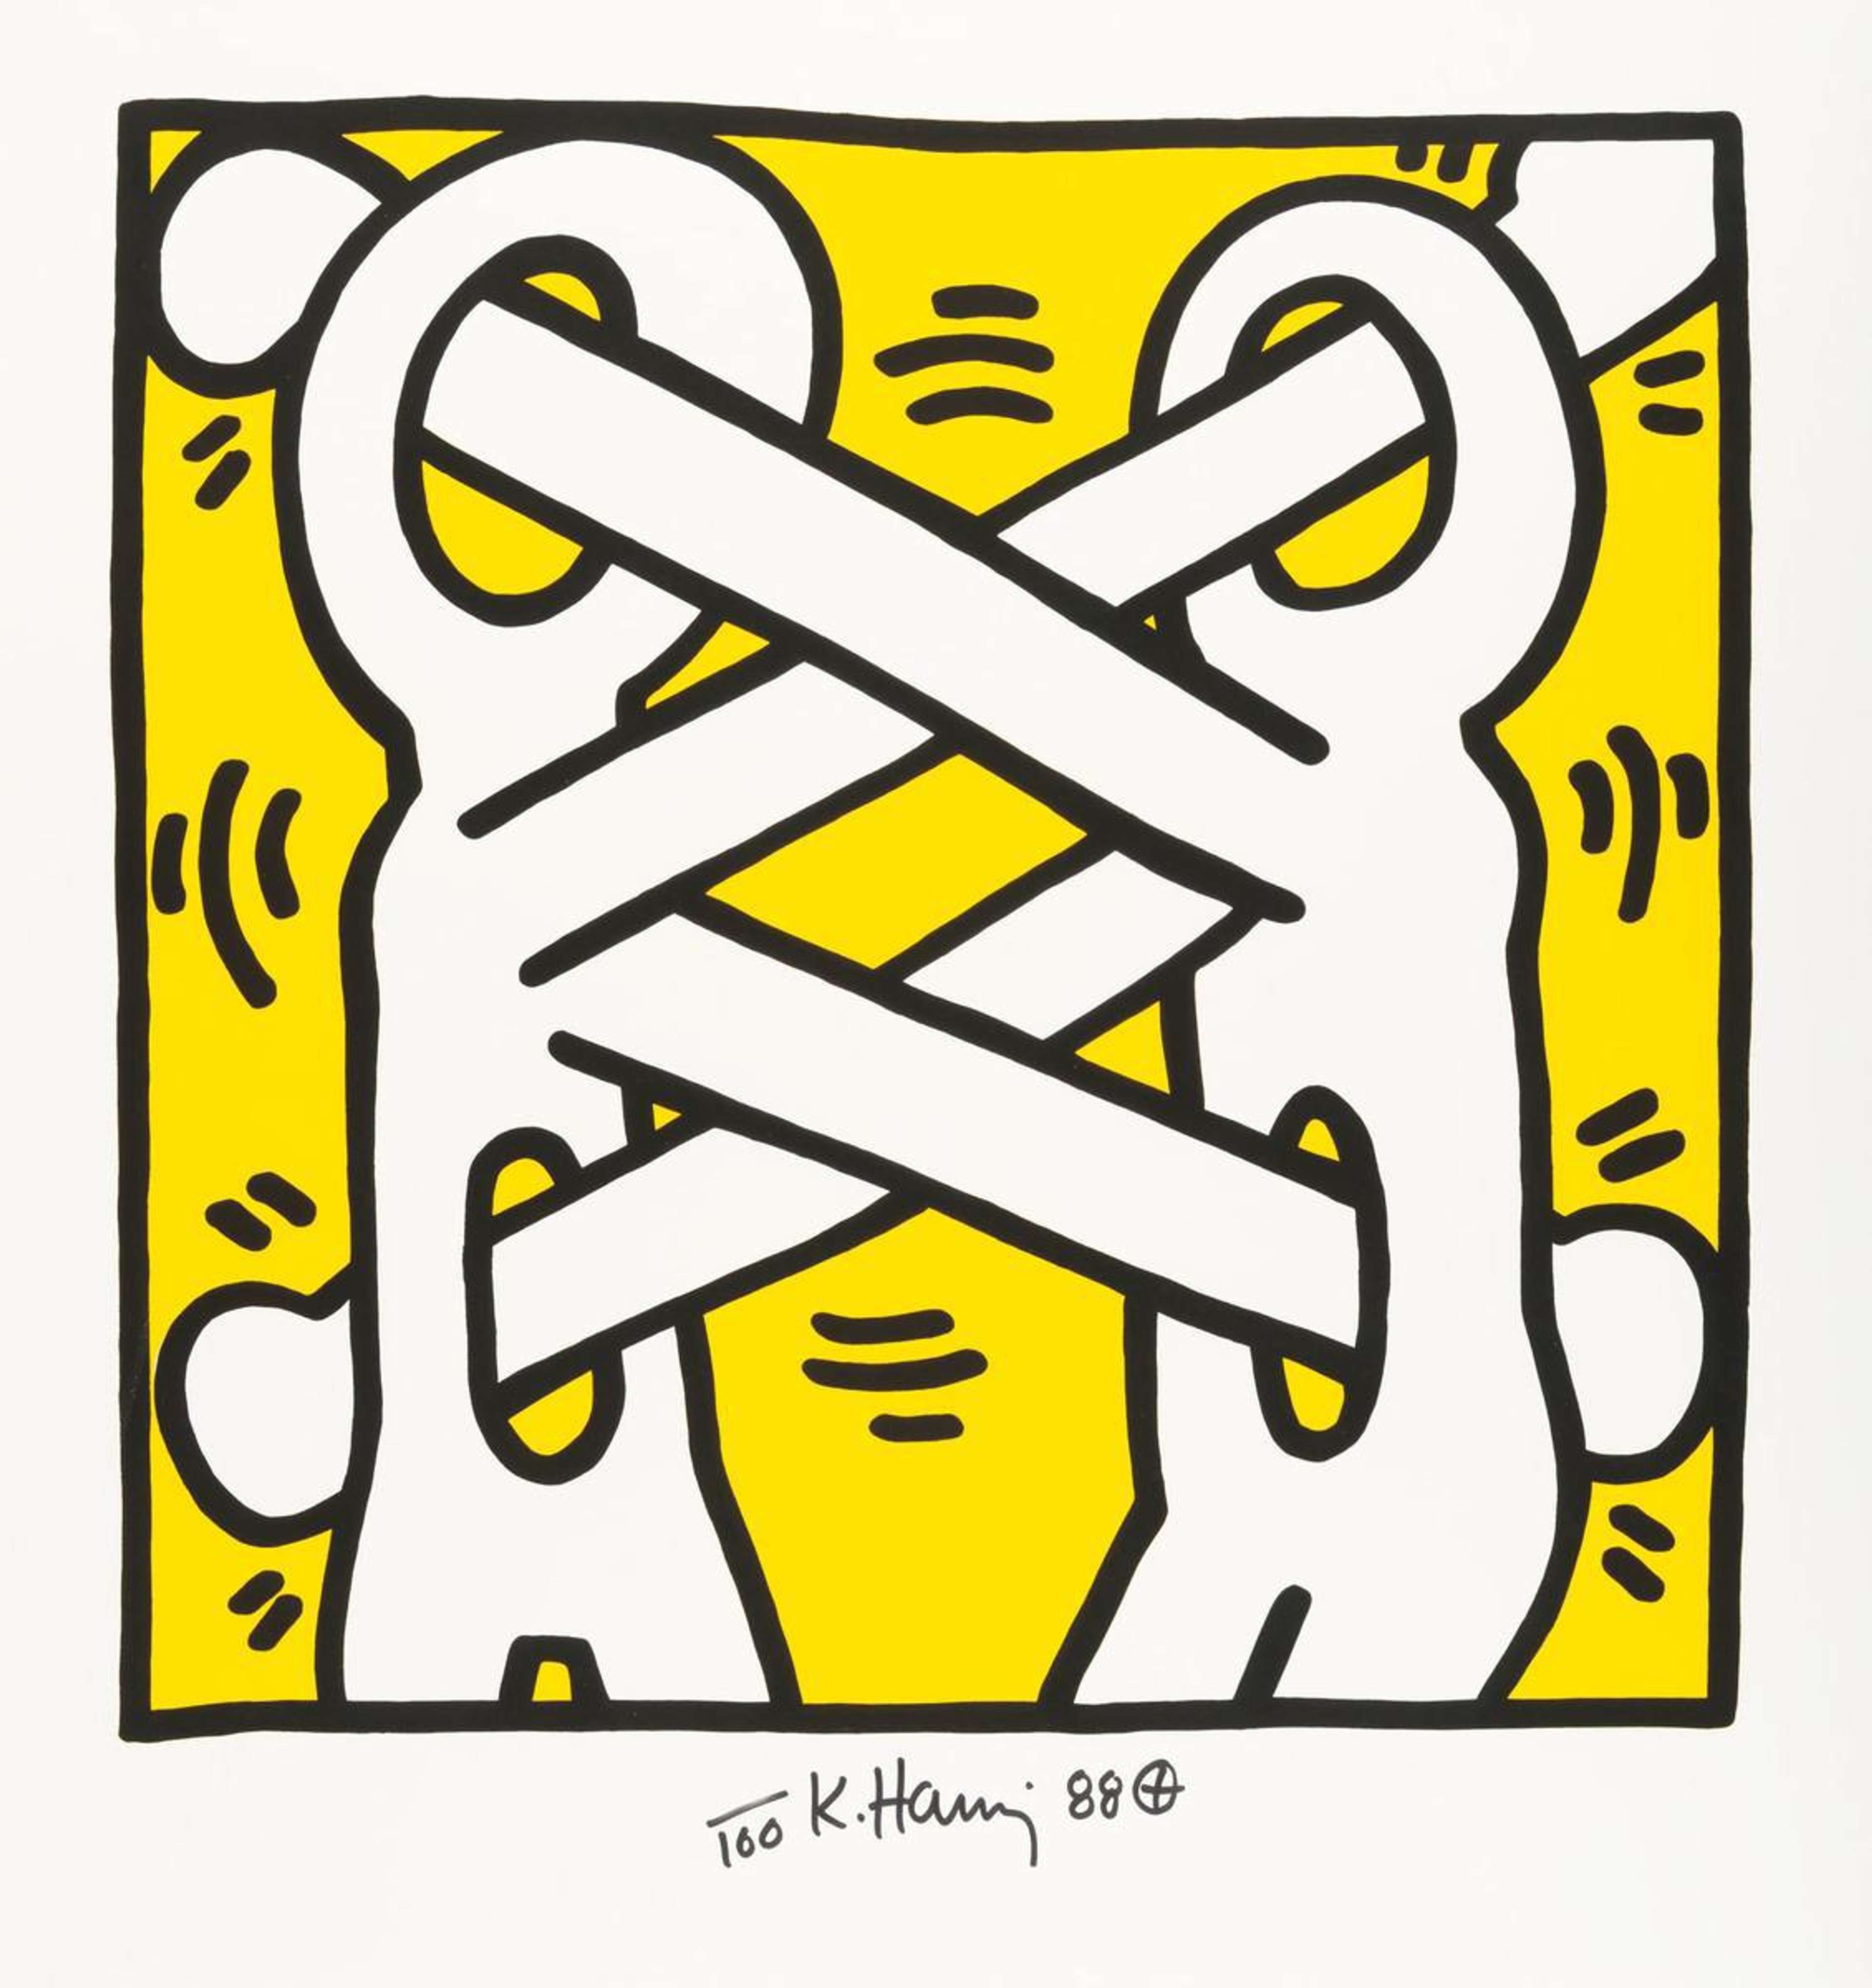 Two white figure of eight shapes with arms and legs interlock, set on a yellow background.